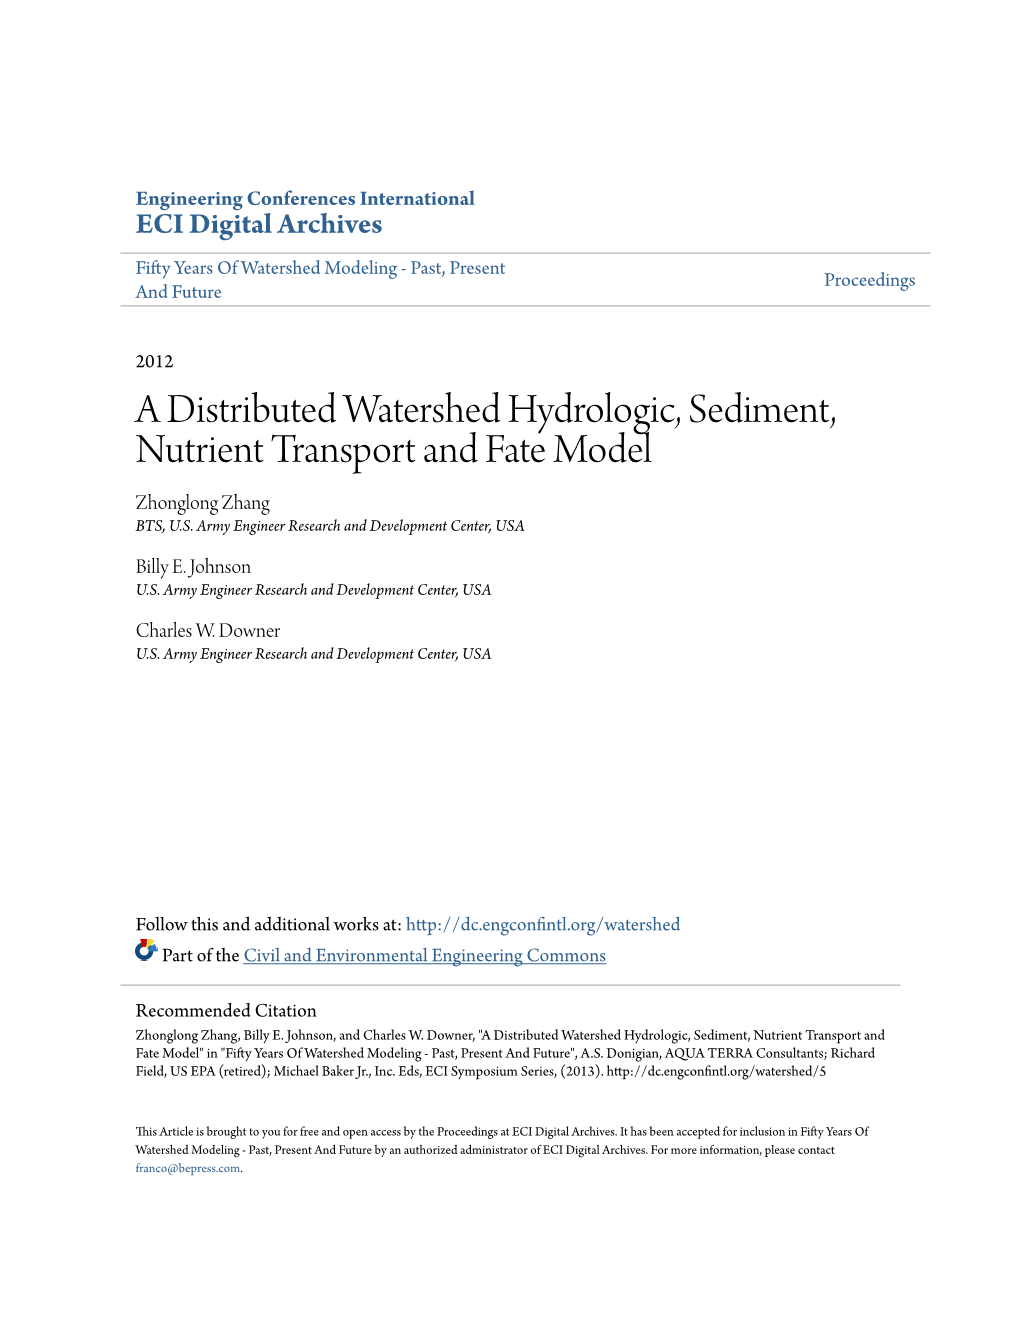 A Distributed Watershed Hydrologic, Sediment, Nutrient Transport and Fate Model Zhonglong Zhang BTS, U.S